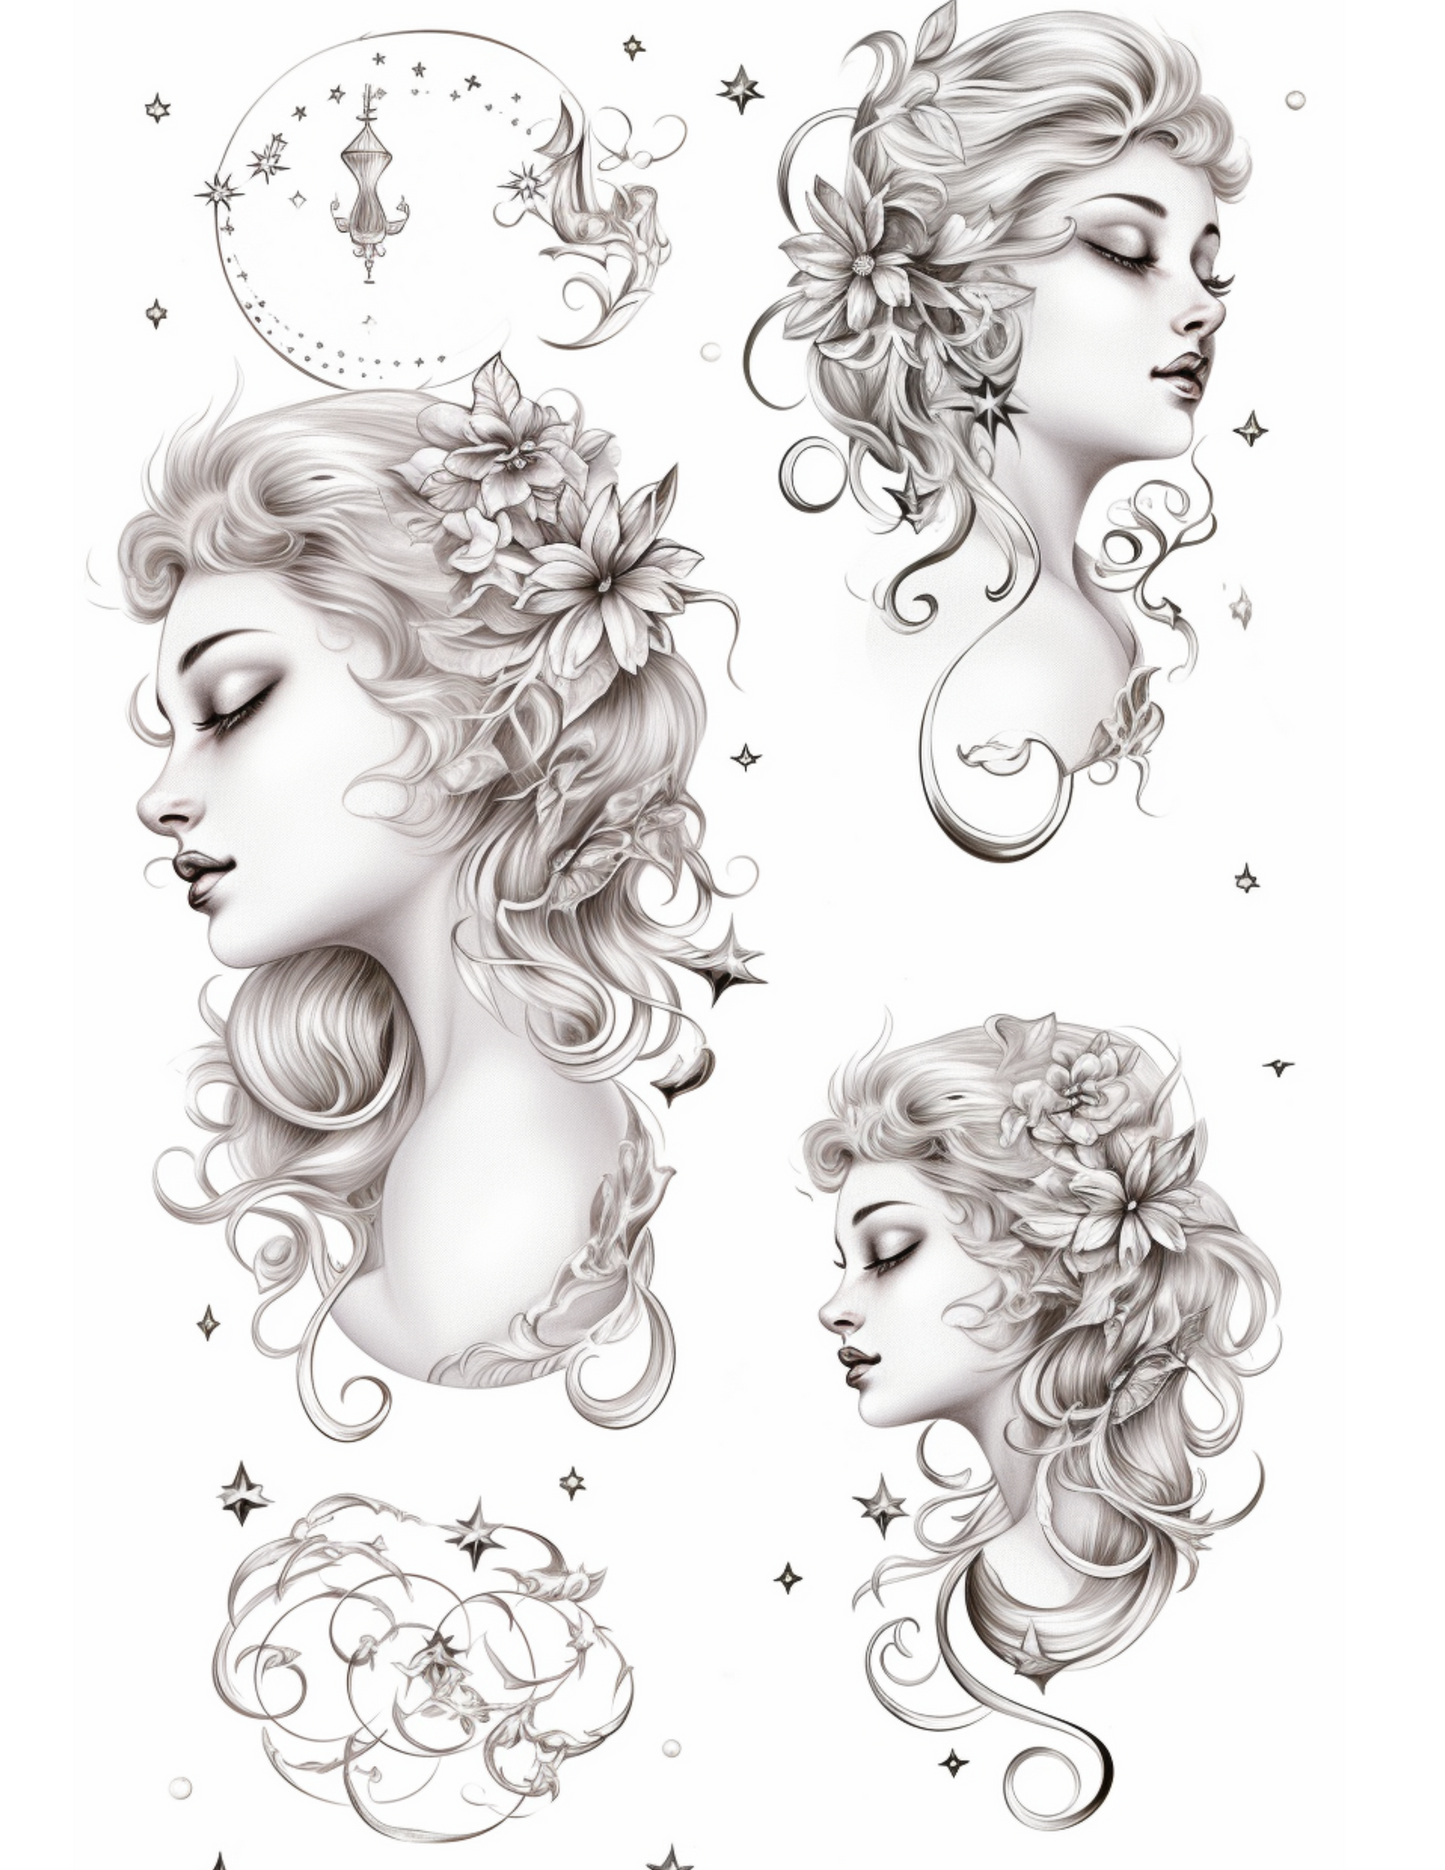 Girl with flowers in hair and other dreamy tattoo styles |Tattoo Aesthetic | Instant download PNG